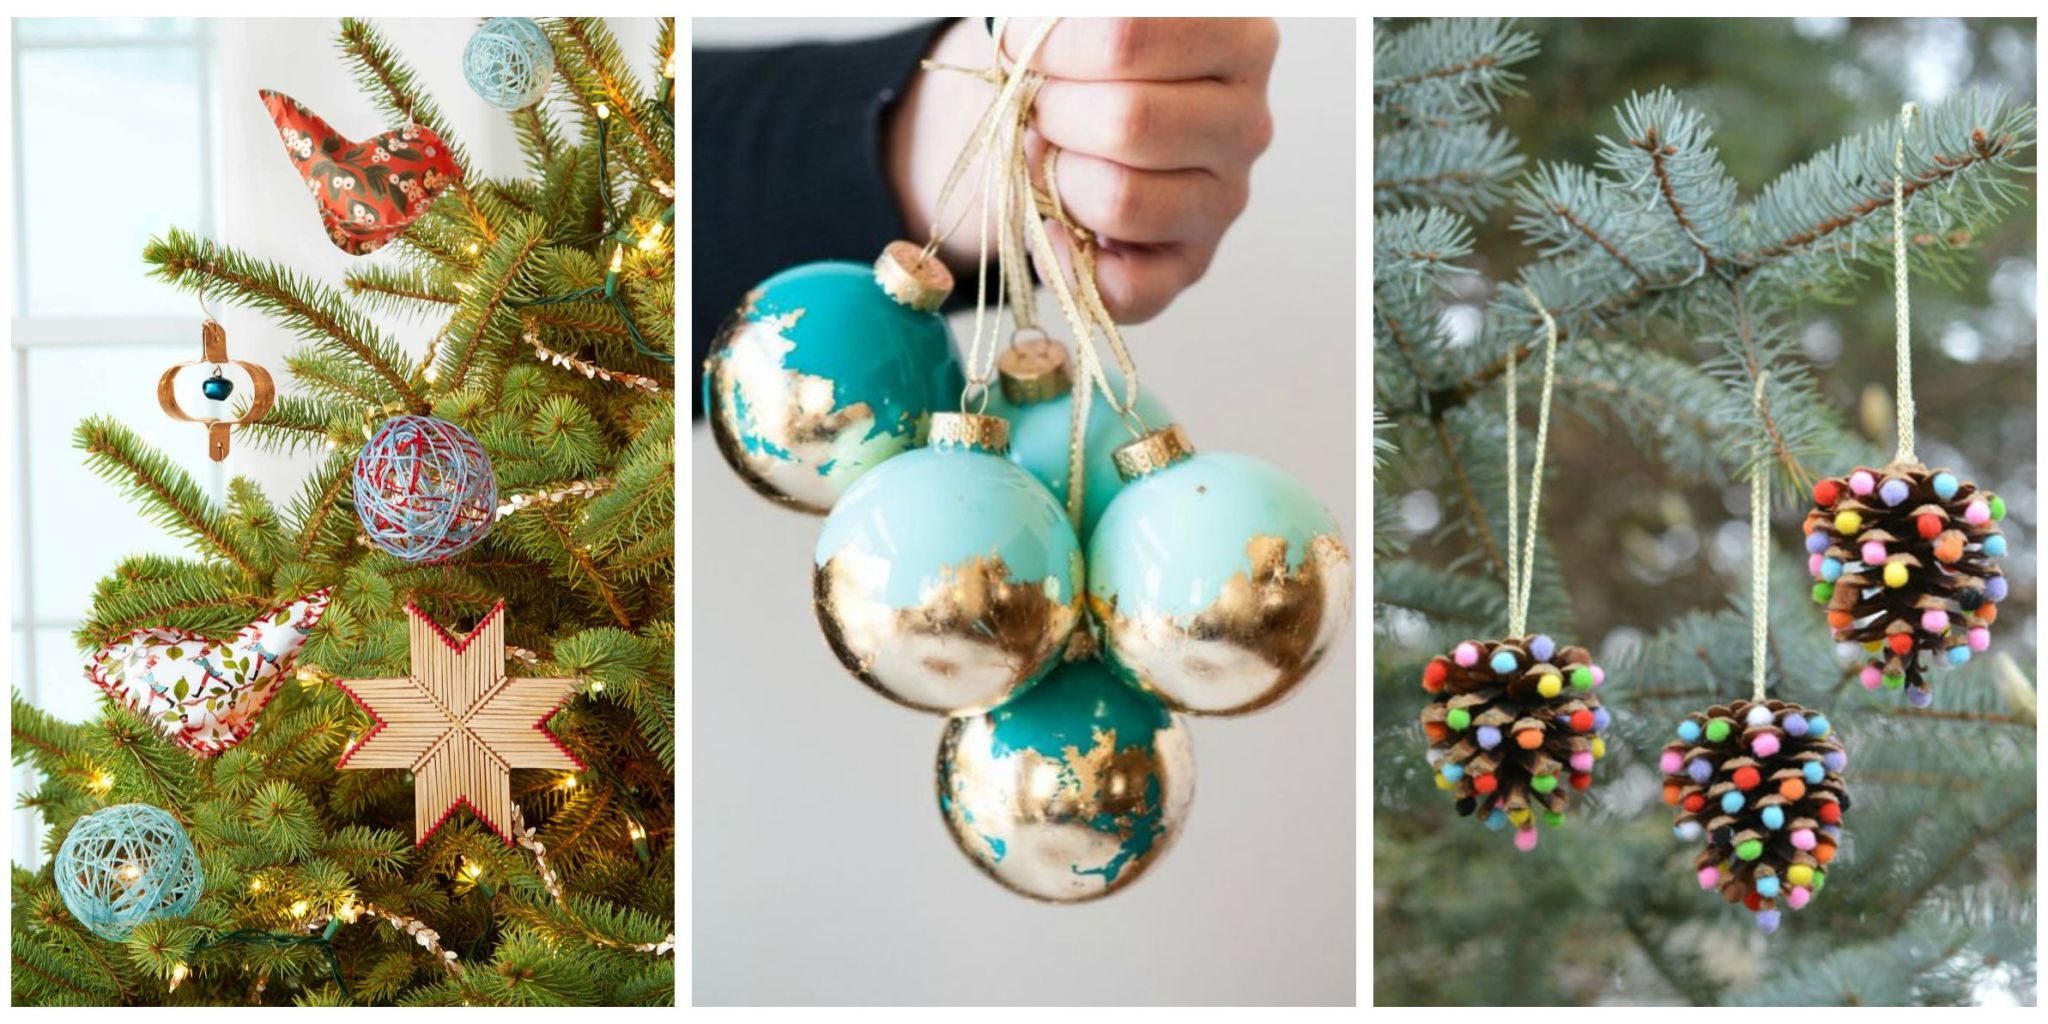 diy ideas for christmas decorations skip the store-bought decor, and get crafty this holiday season with these KHEFUGO